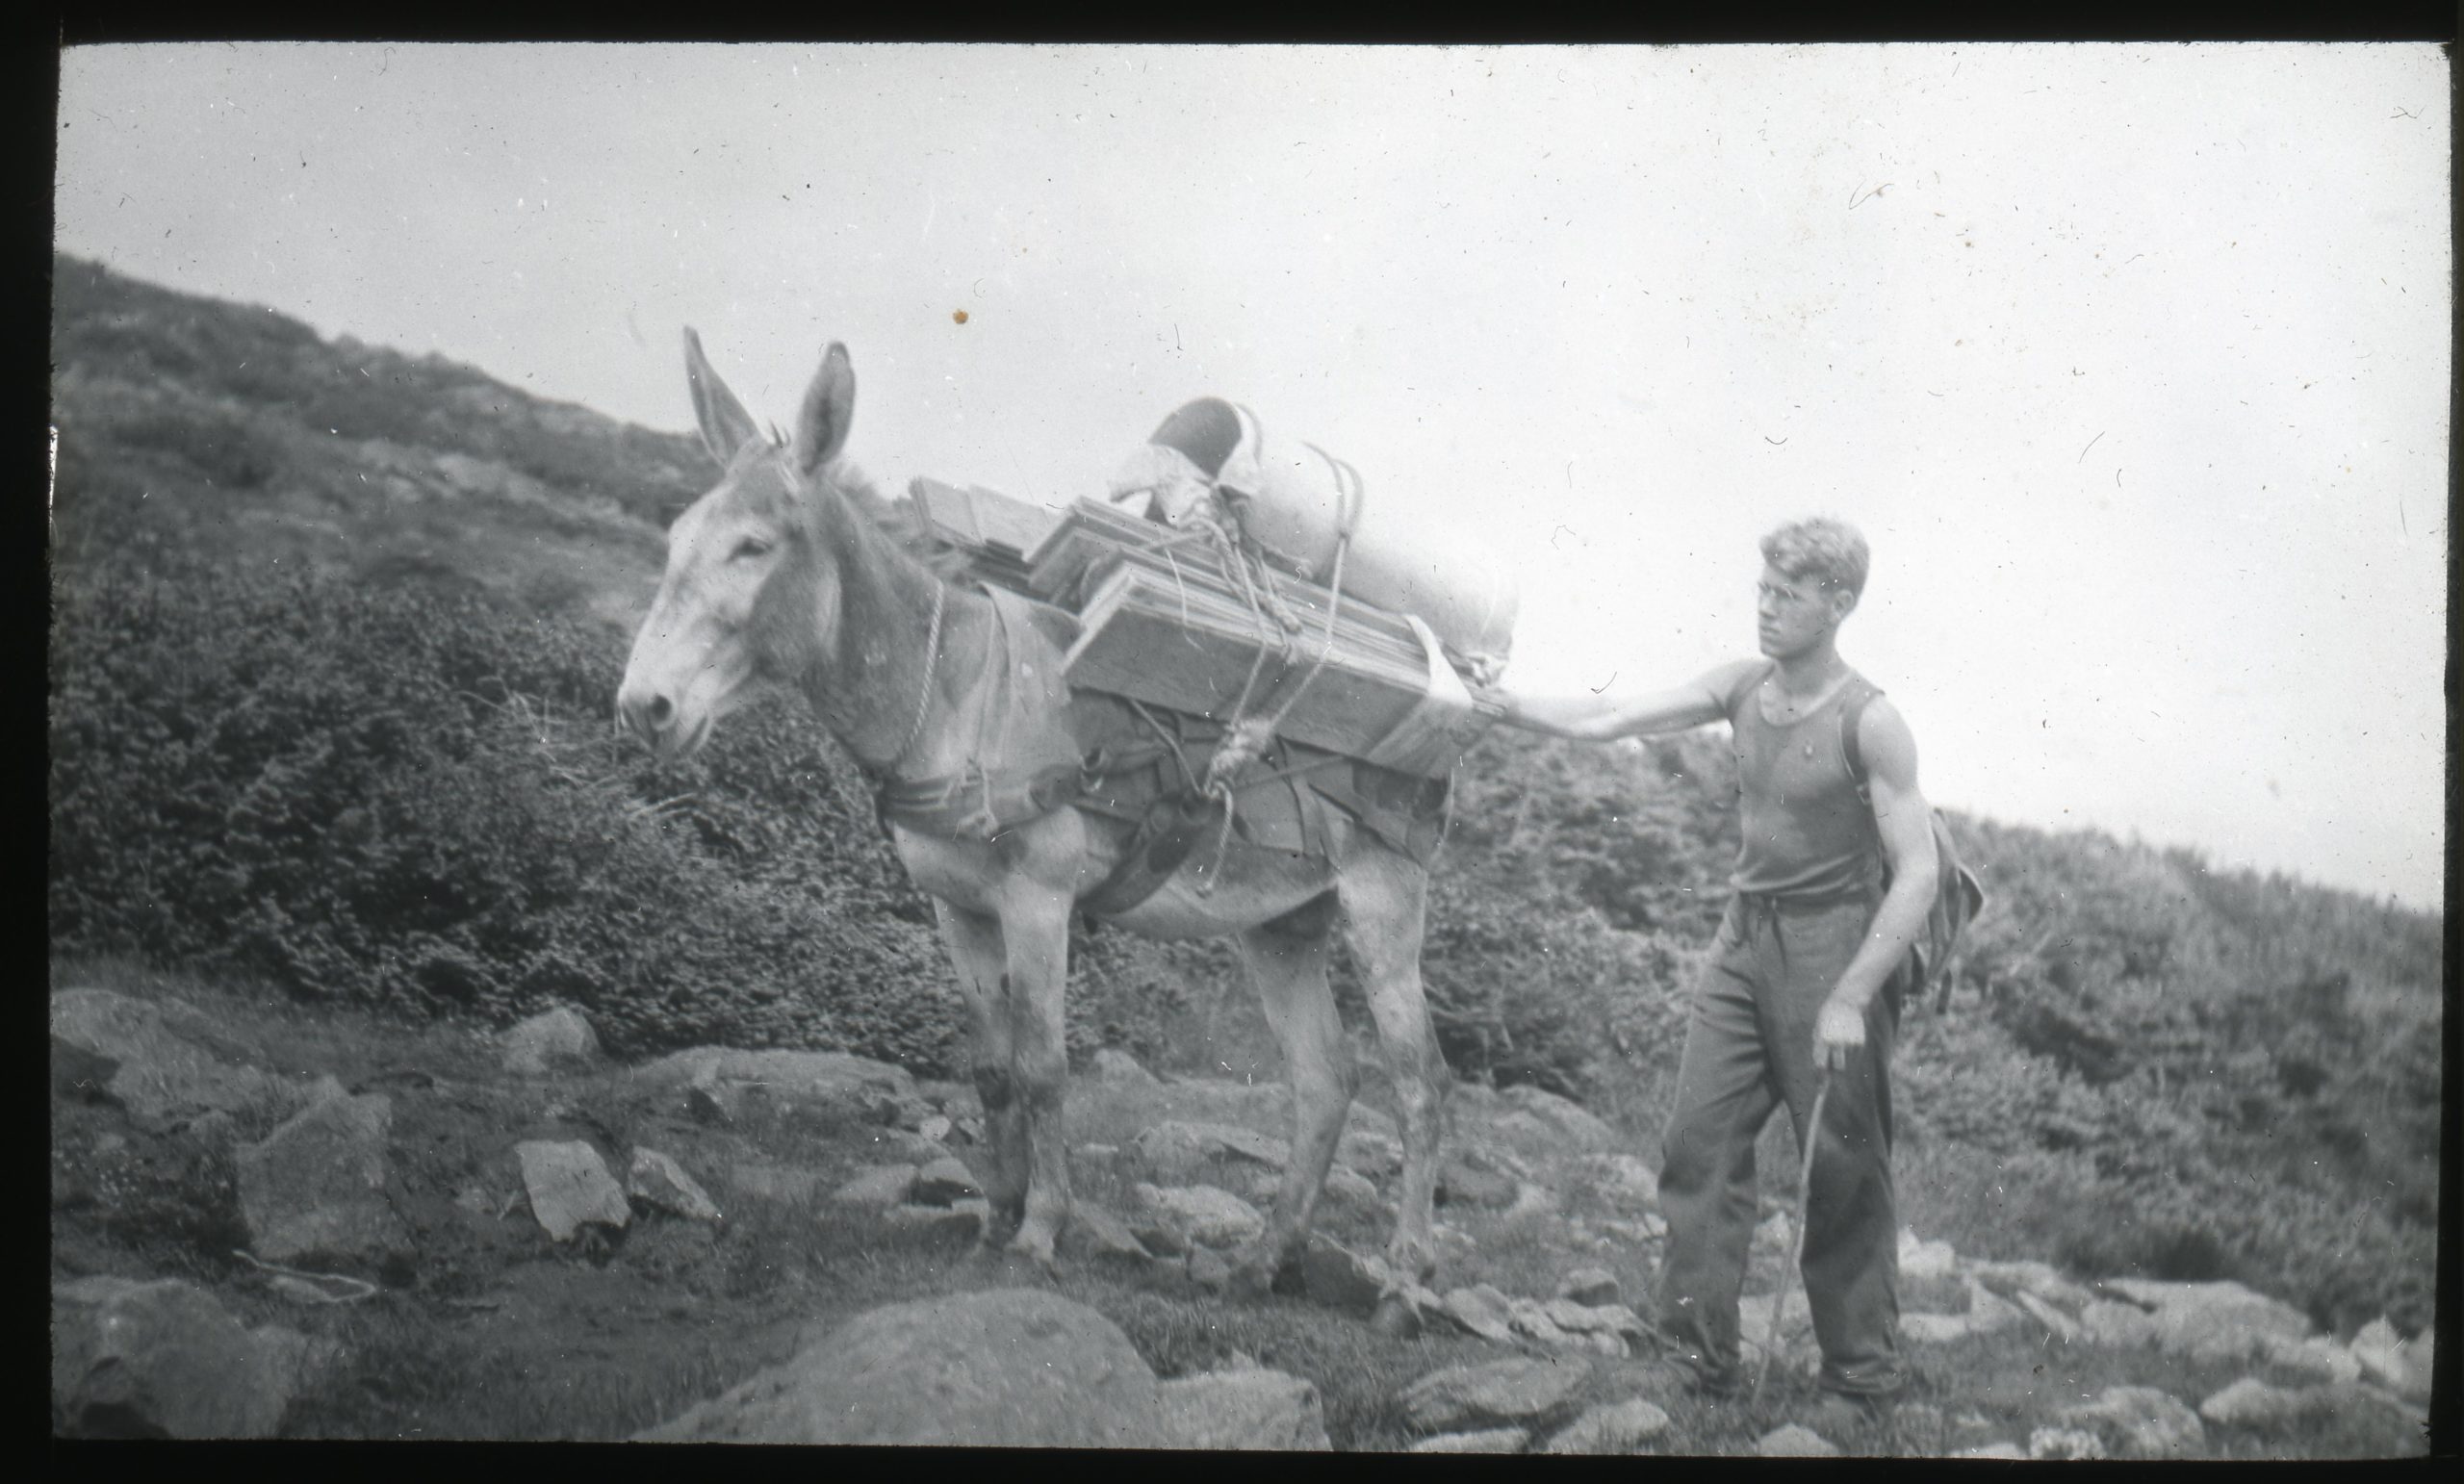 Historic image of donkeys carrying packs in the White Mountains